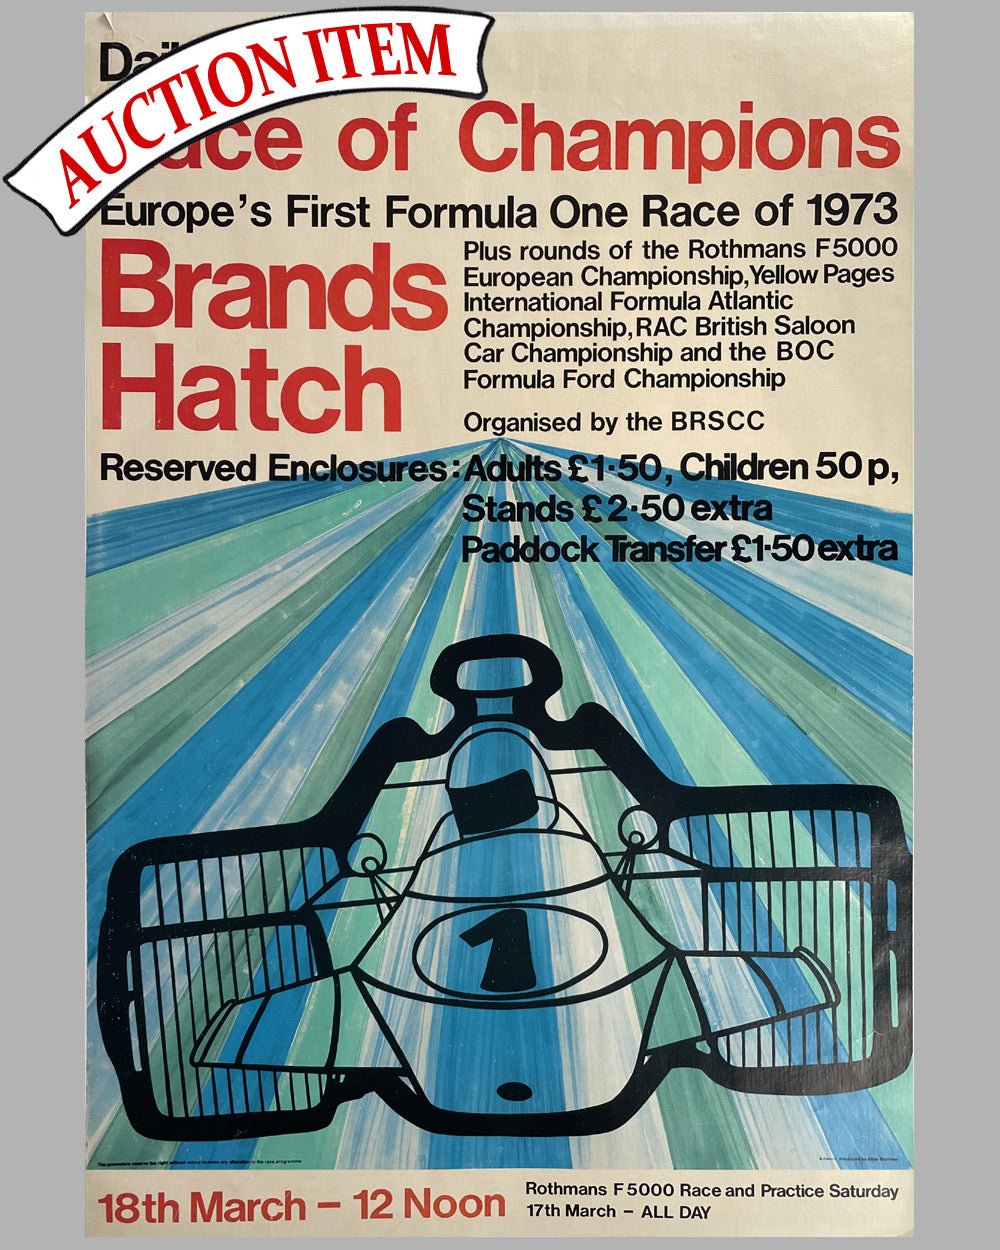 5 - 1973 Formula 1 Race of Champions original race poster by Han Burrows